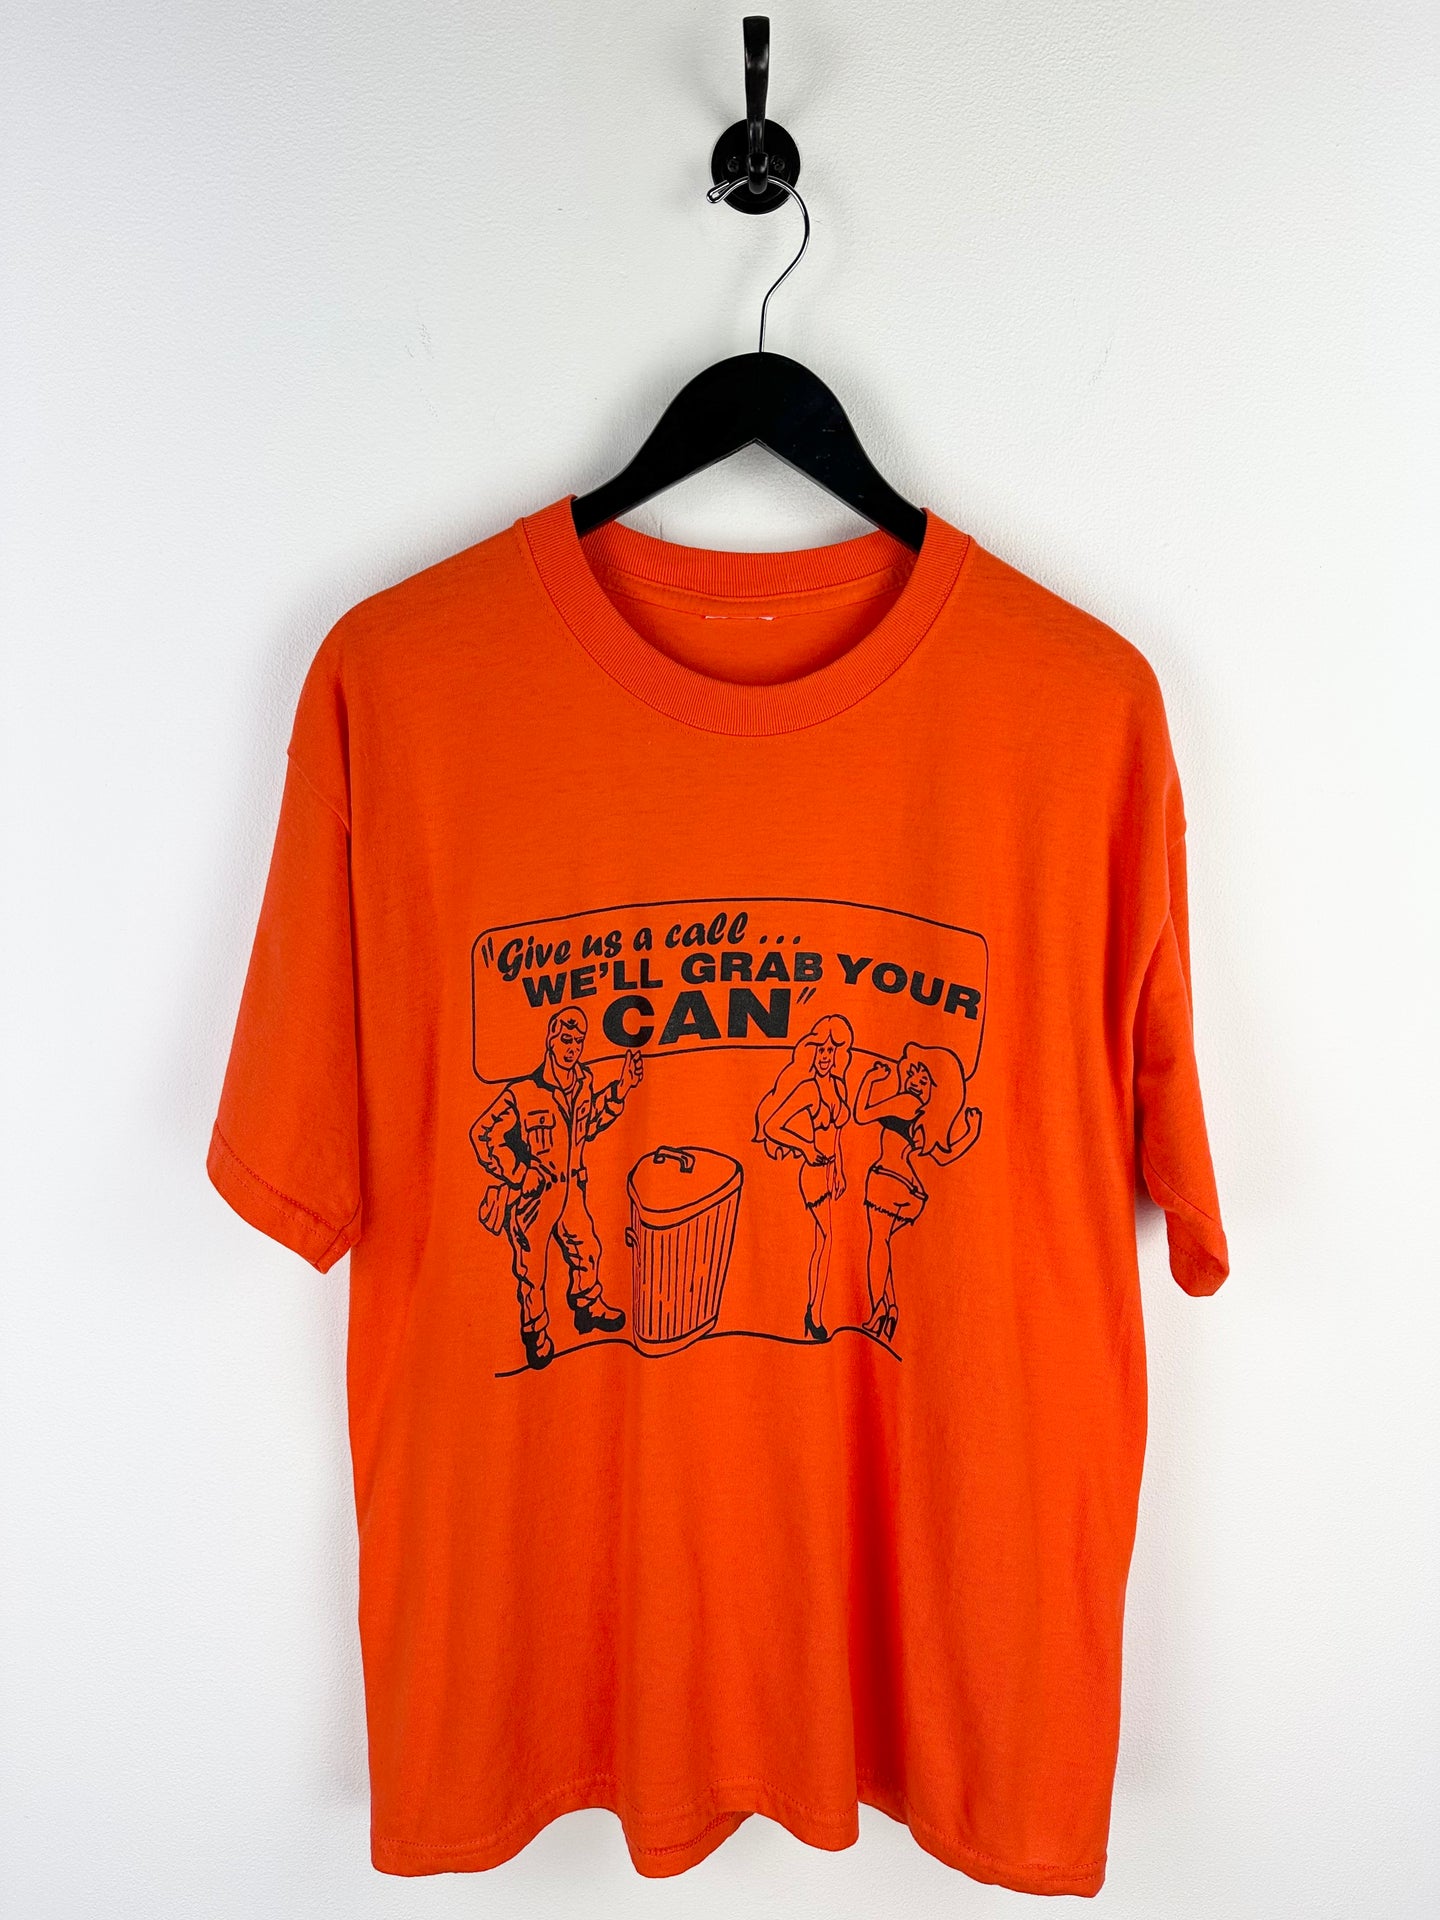 Vintage Grab Your Can Tee